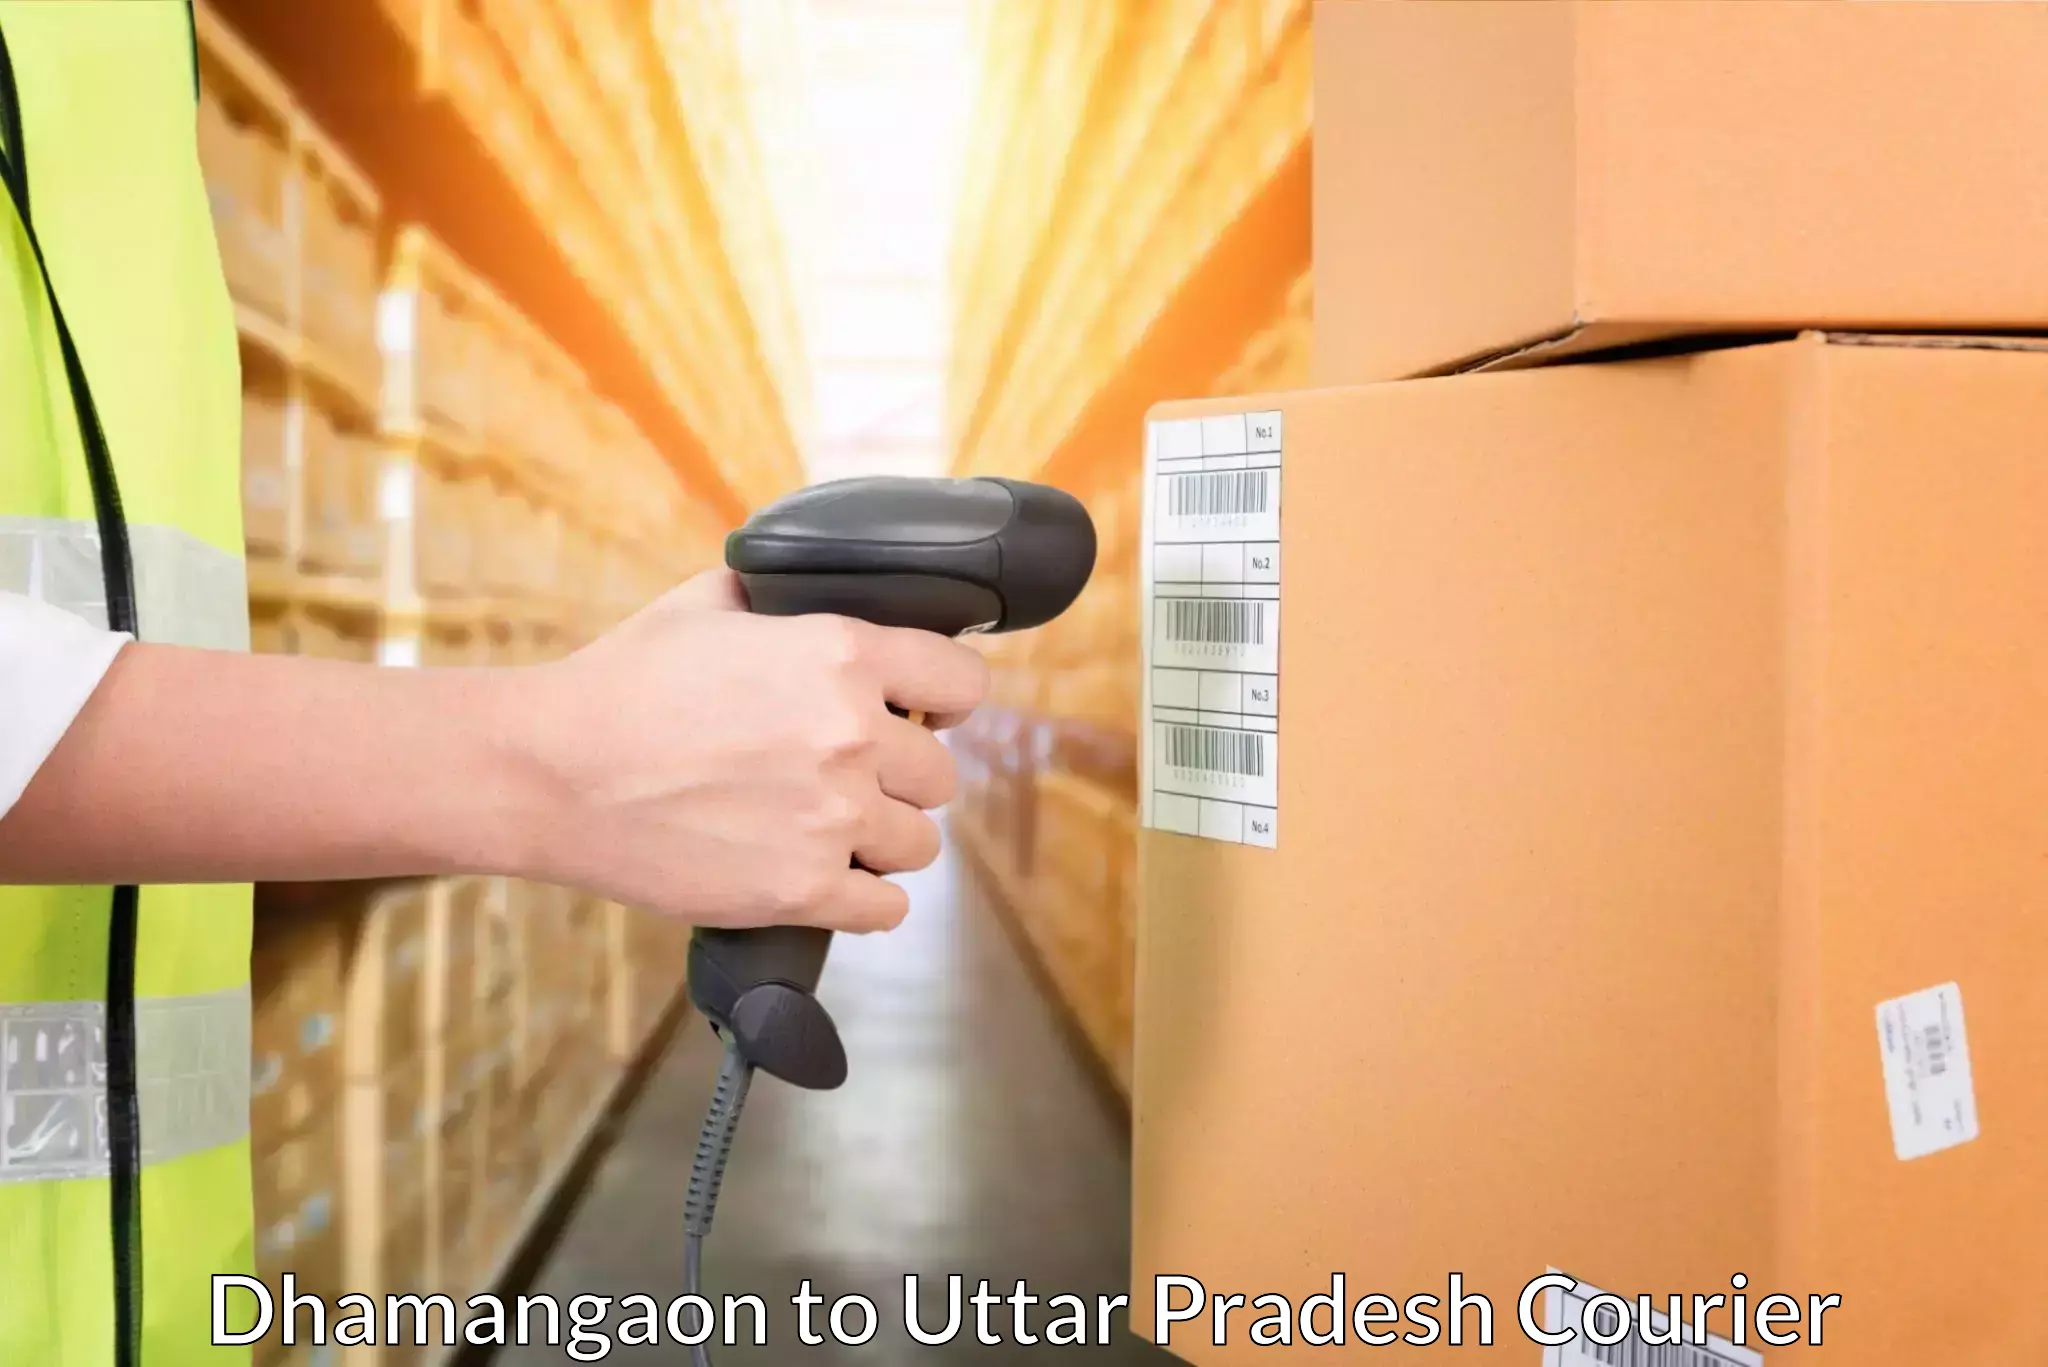 Residential courier service Dhamangaon to Agra